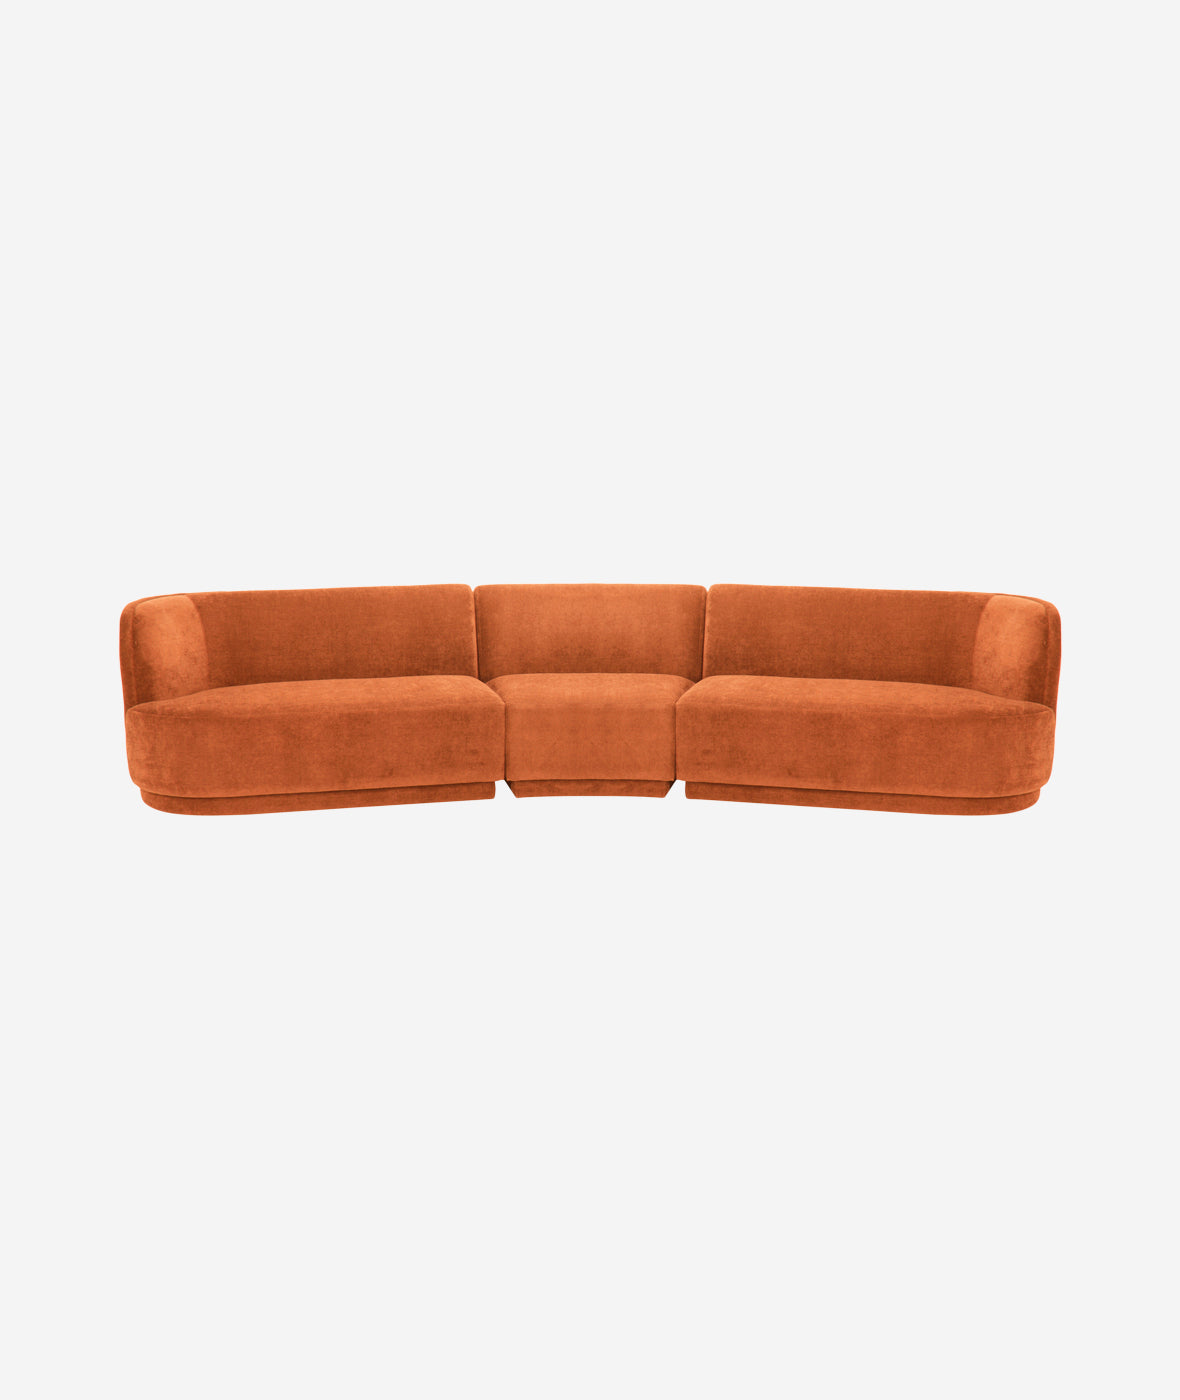 Yoon Compass Sectional - Fried Rust